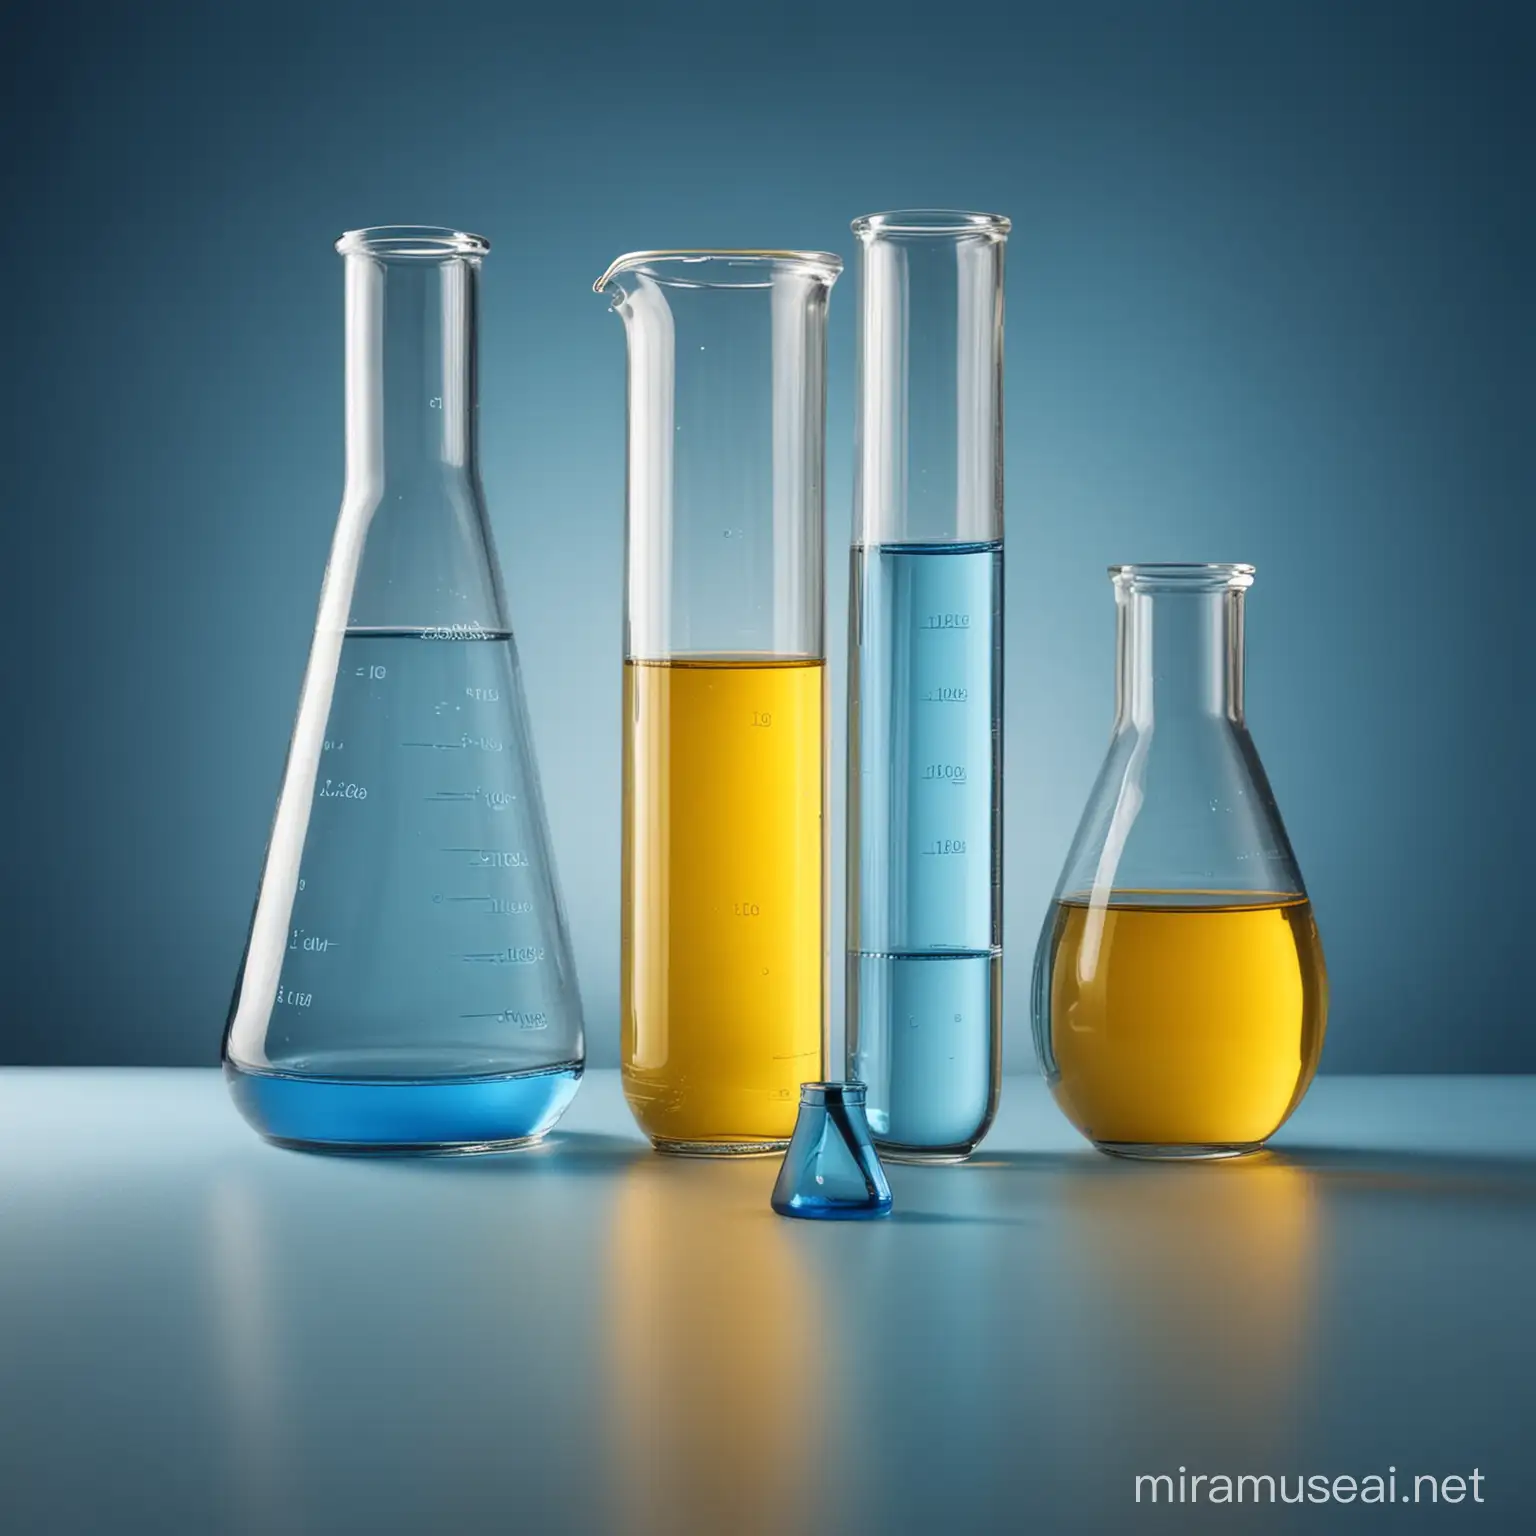 blue test tube and flask in the middle of illuminated blue and yellow background